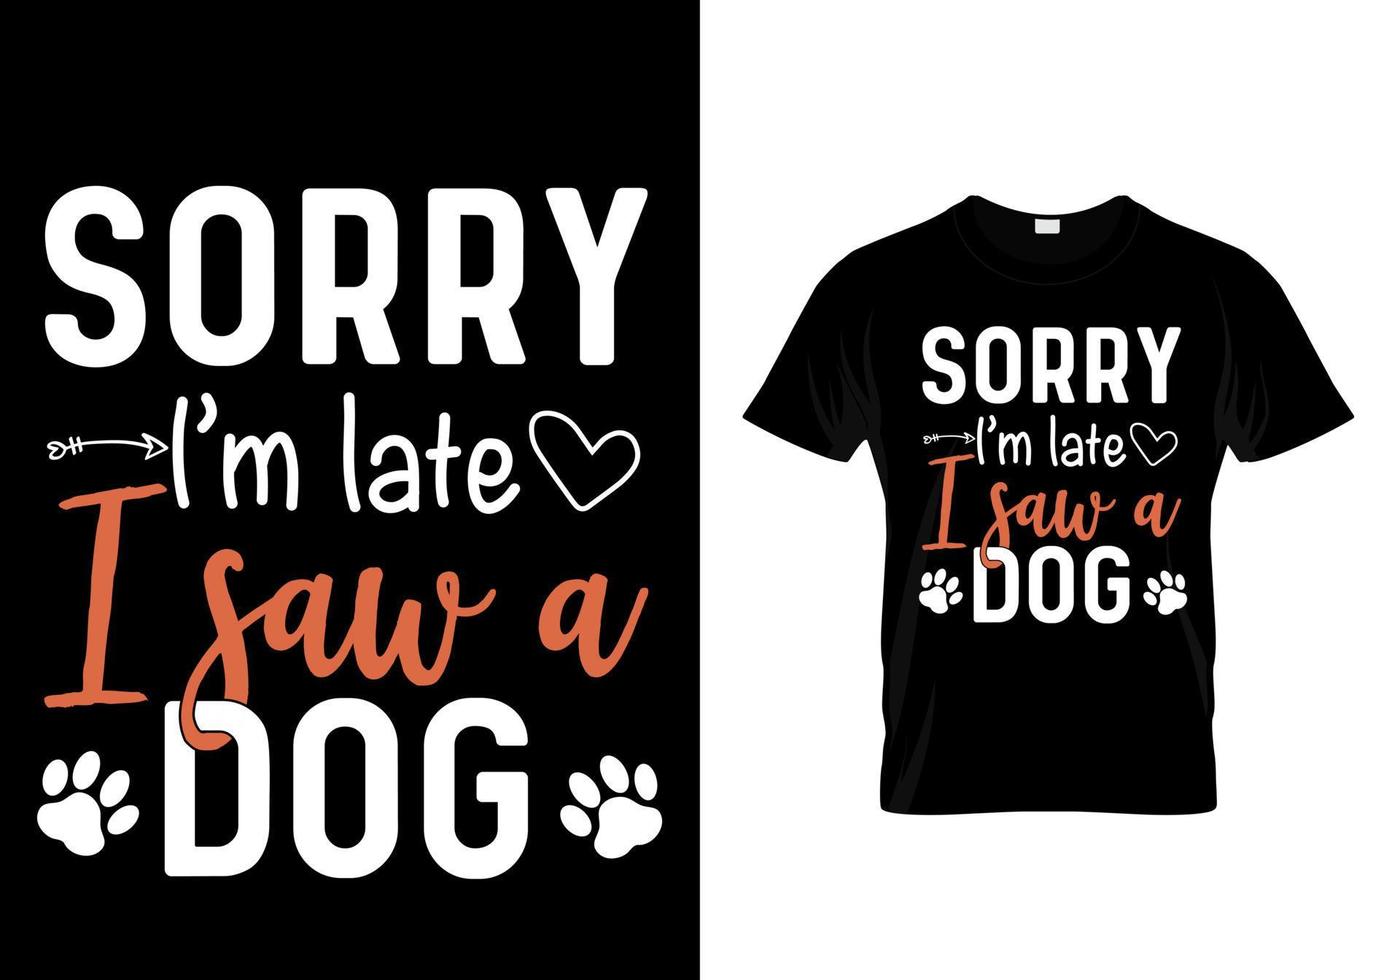 Sorry I'm late I saw a dog. dog lover t-shirt vector